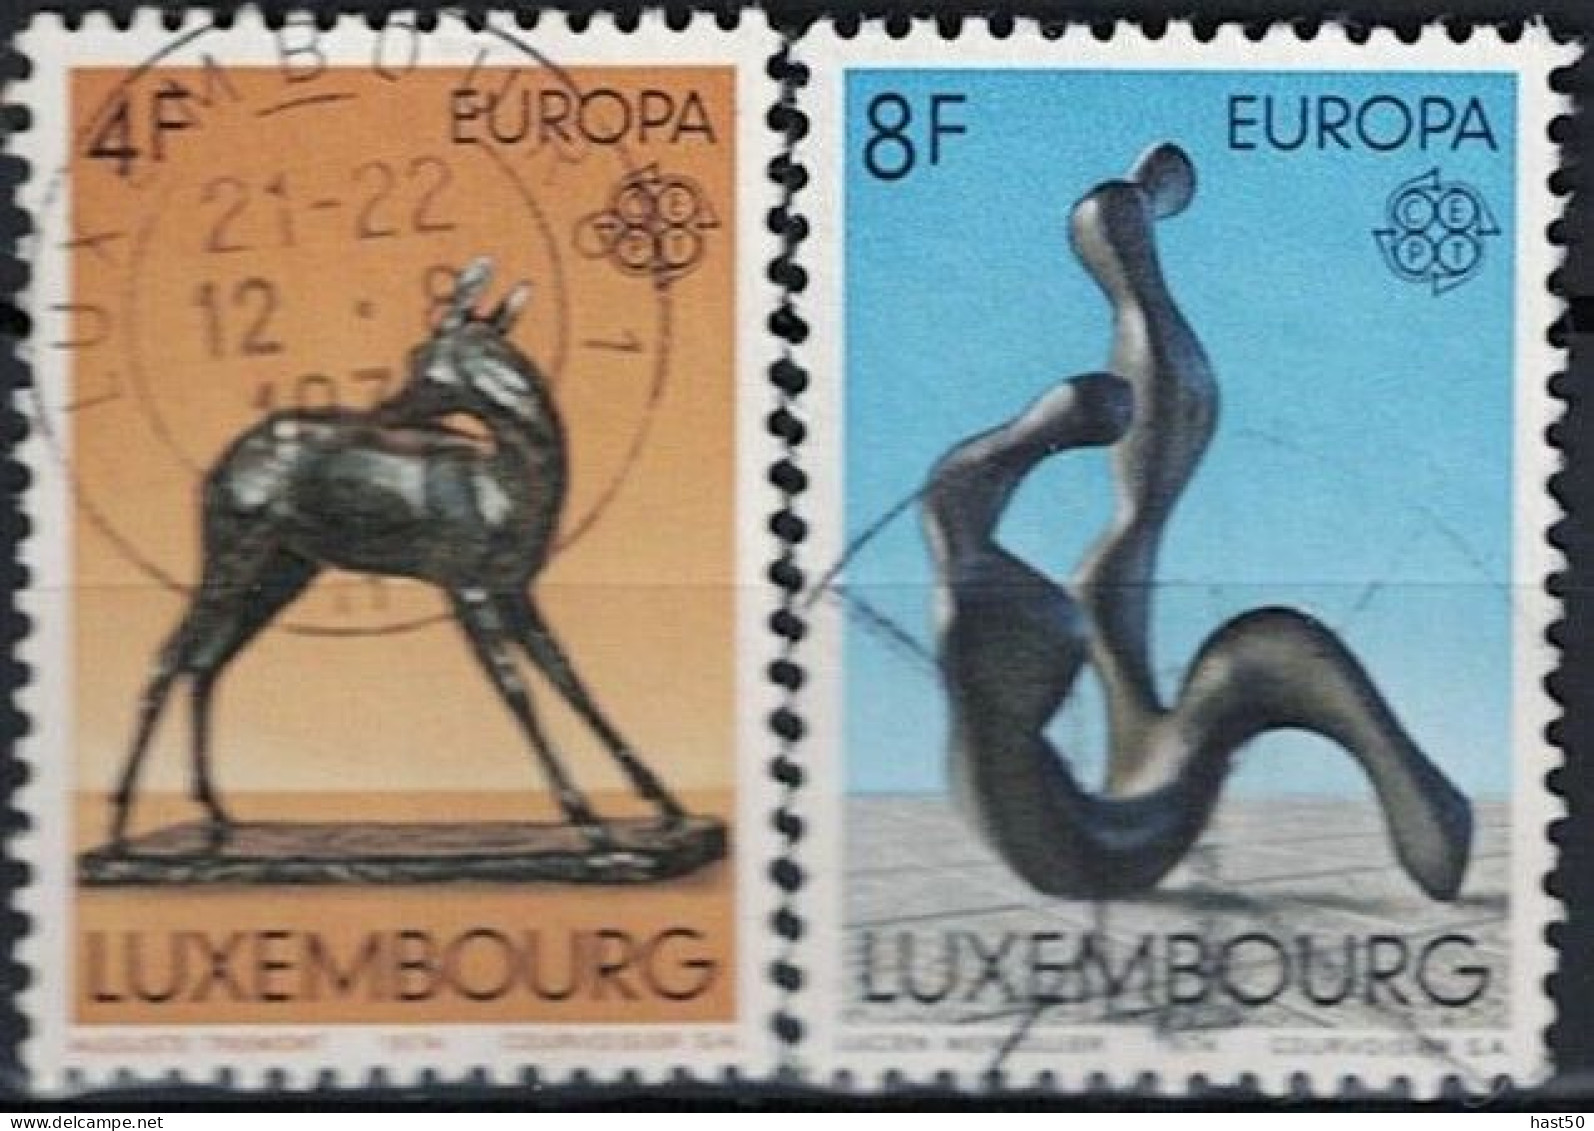 Luxemburg Luxembourg - Europa (MiNr: 882/3) 1974 - Gest Used Obl - 1974